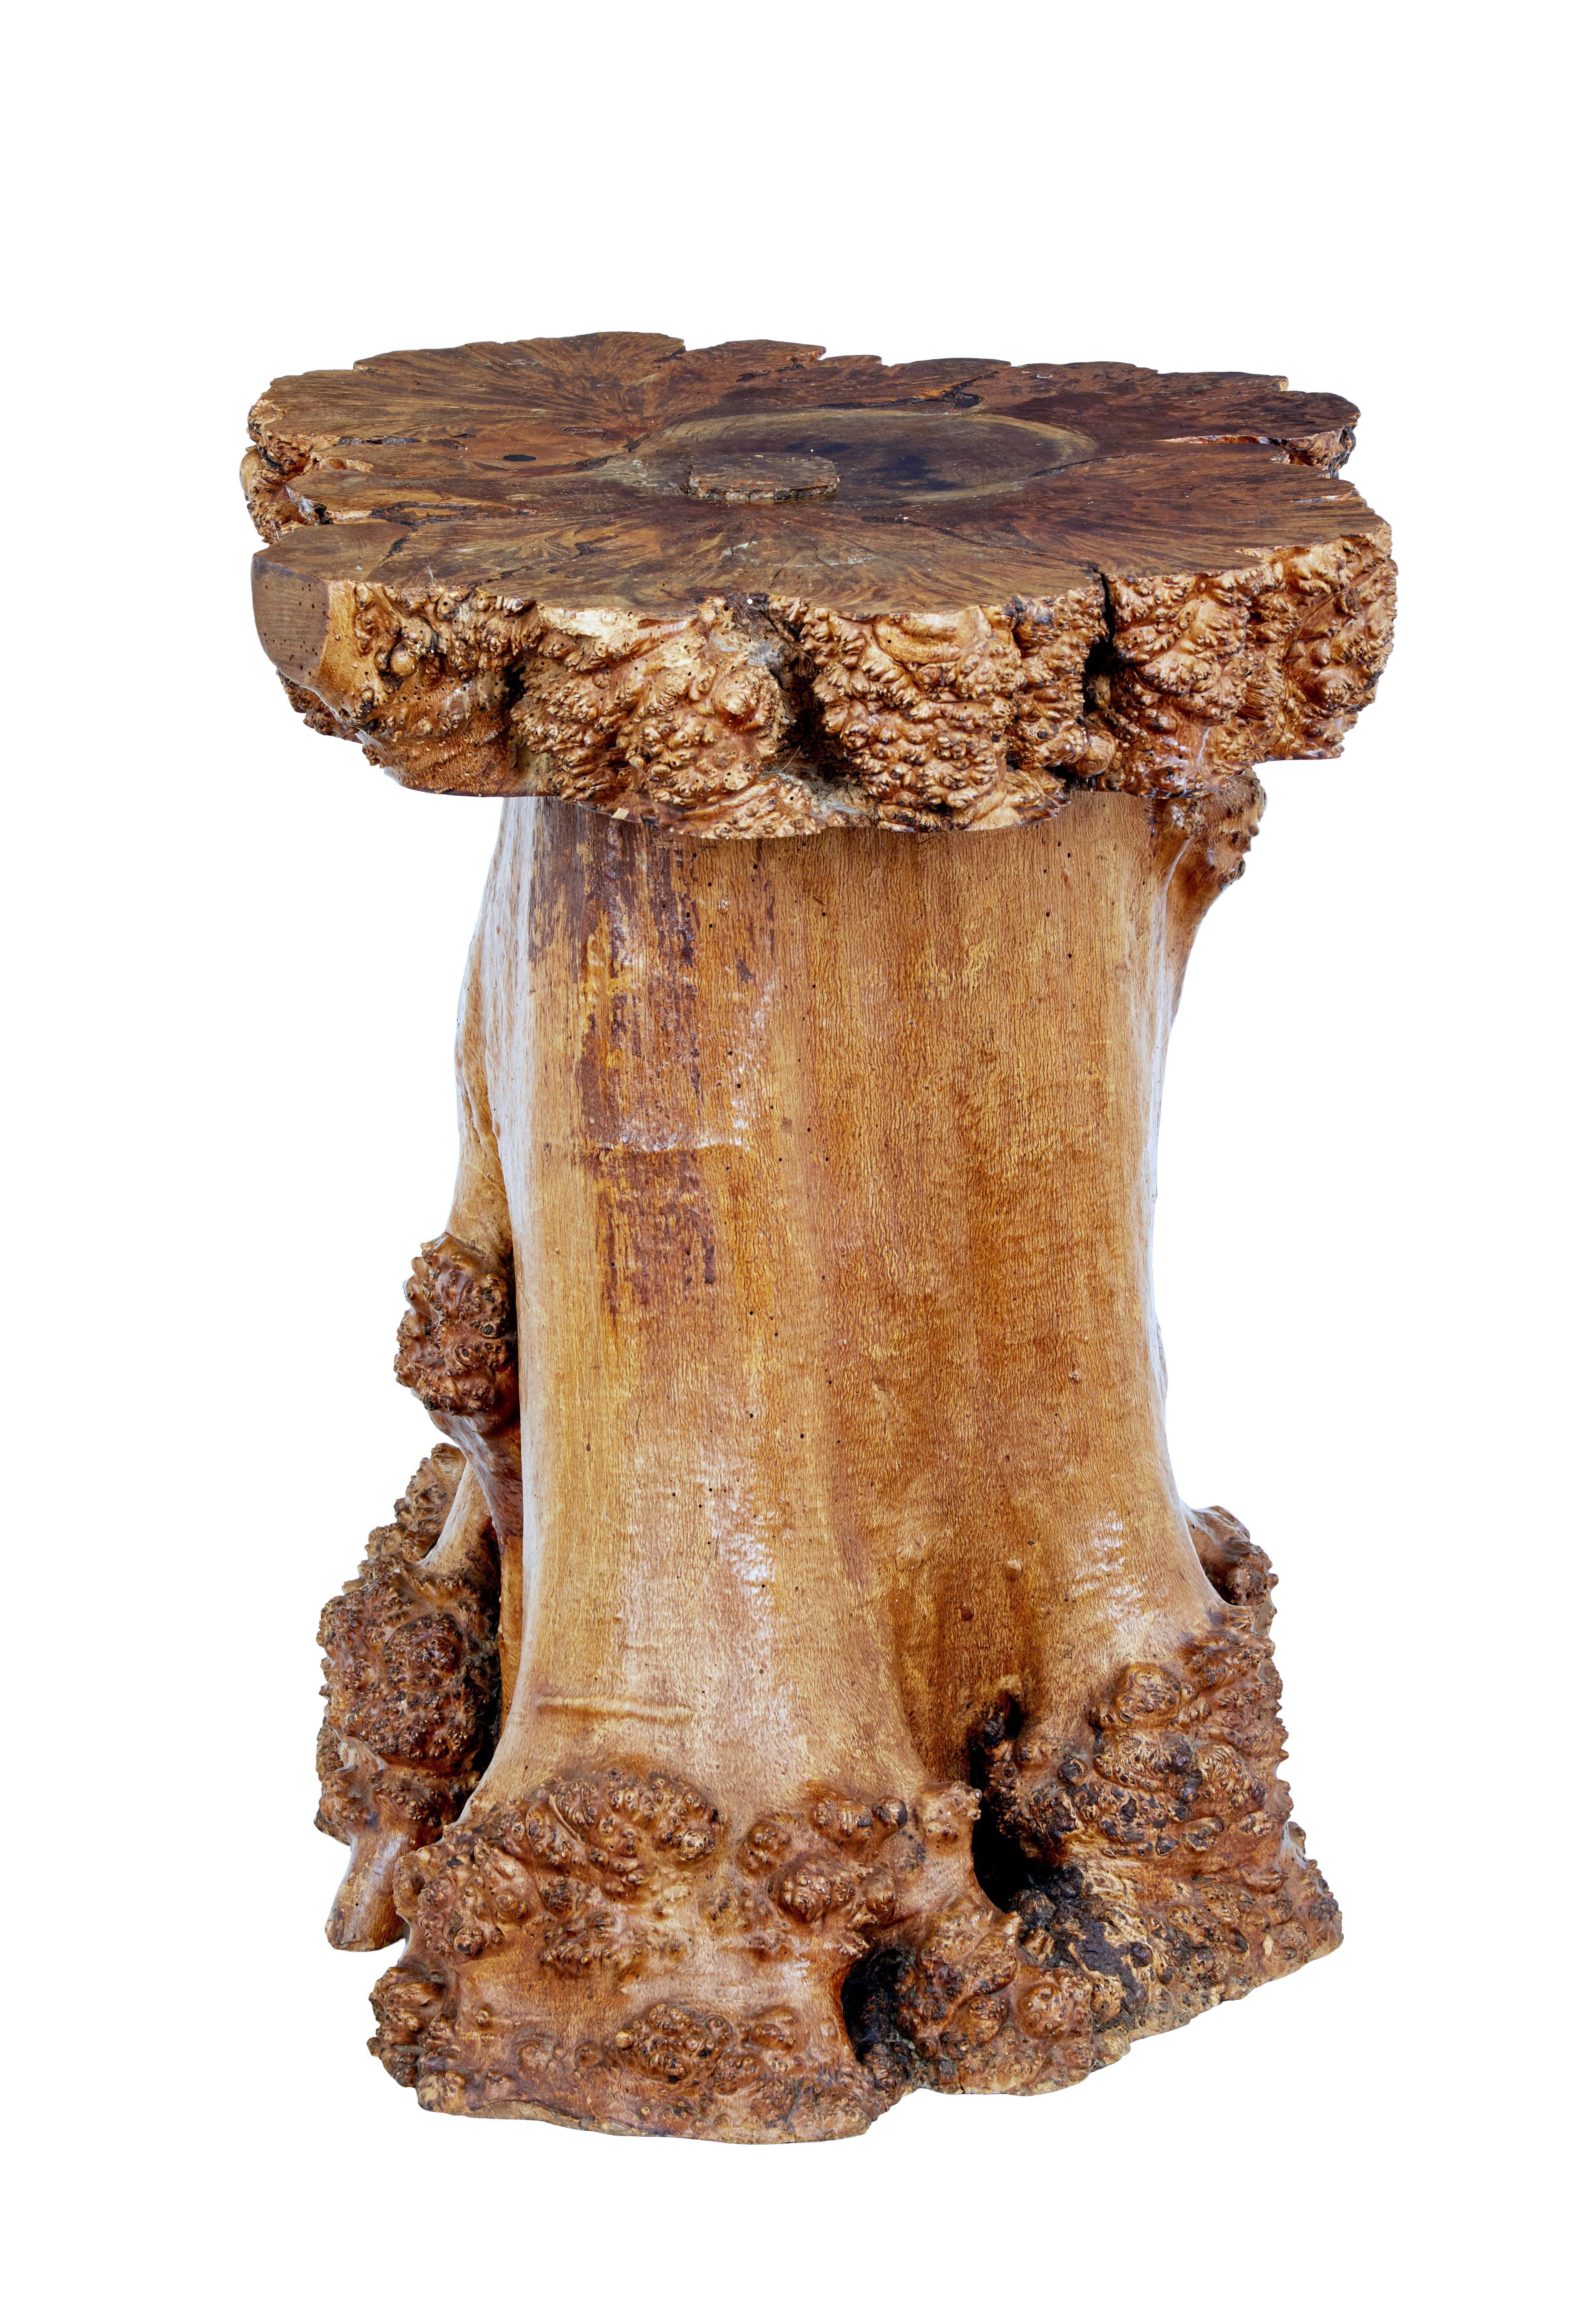 Rare and unusual burr birch stump table, circa 1900.

Top section made from the burr section of the tree with the base forming the stand.

Top showing a complete section of a tree with patches for structural support. Standing on a complete